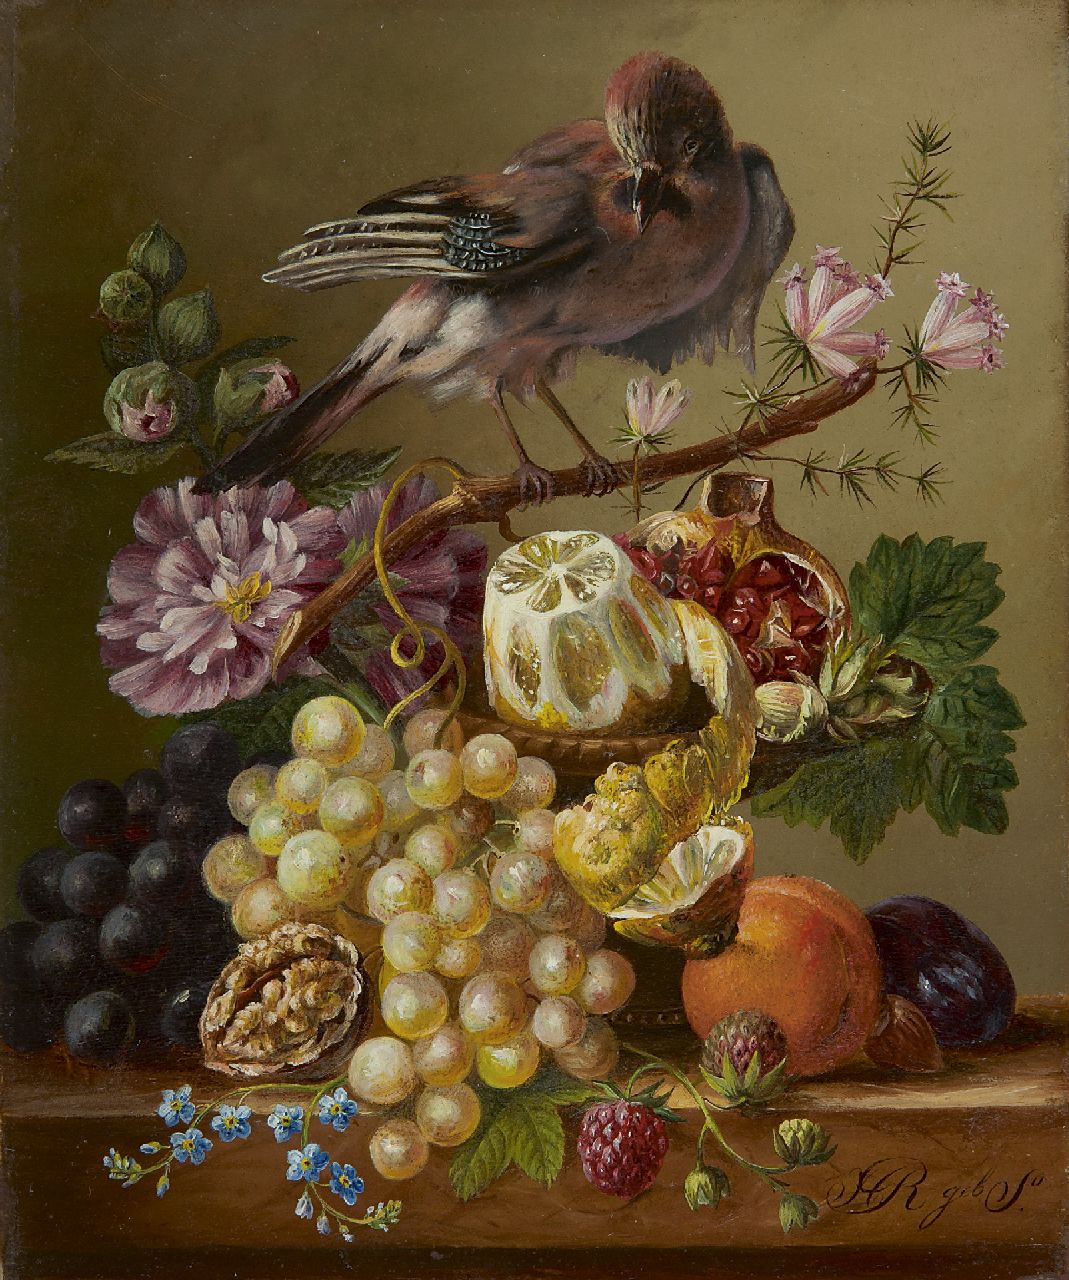 Onbekend   | Onbekend | Paintings offered for sale | A still life with fruit and a bird on a branch, oil on panel 21.5 x 18.0 cm, signed l.r.  'H R geb. S'